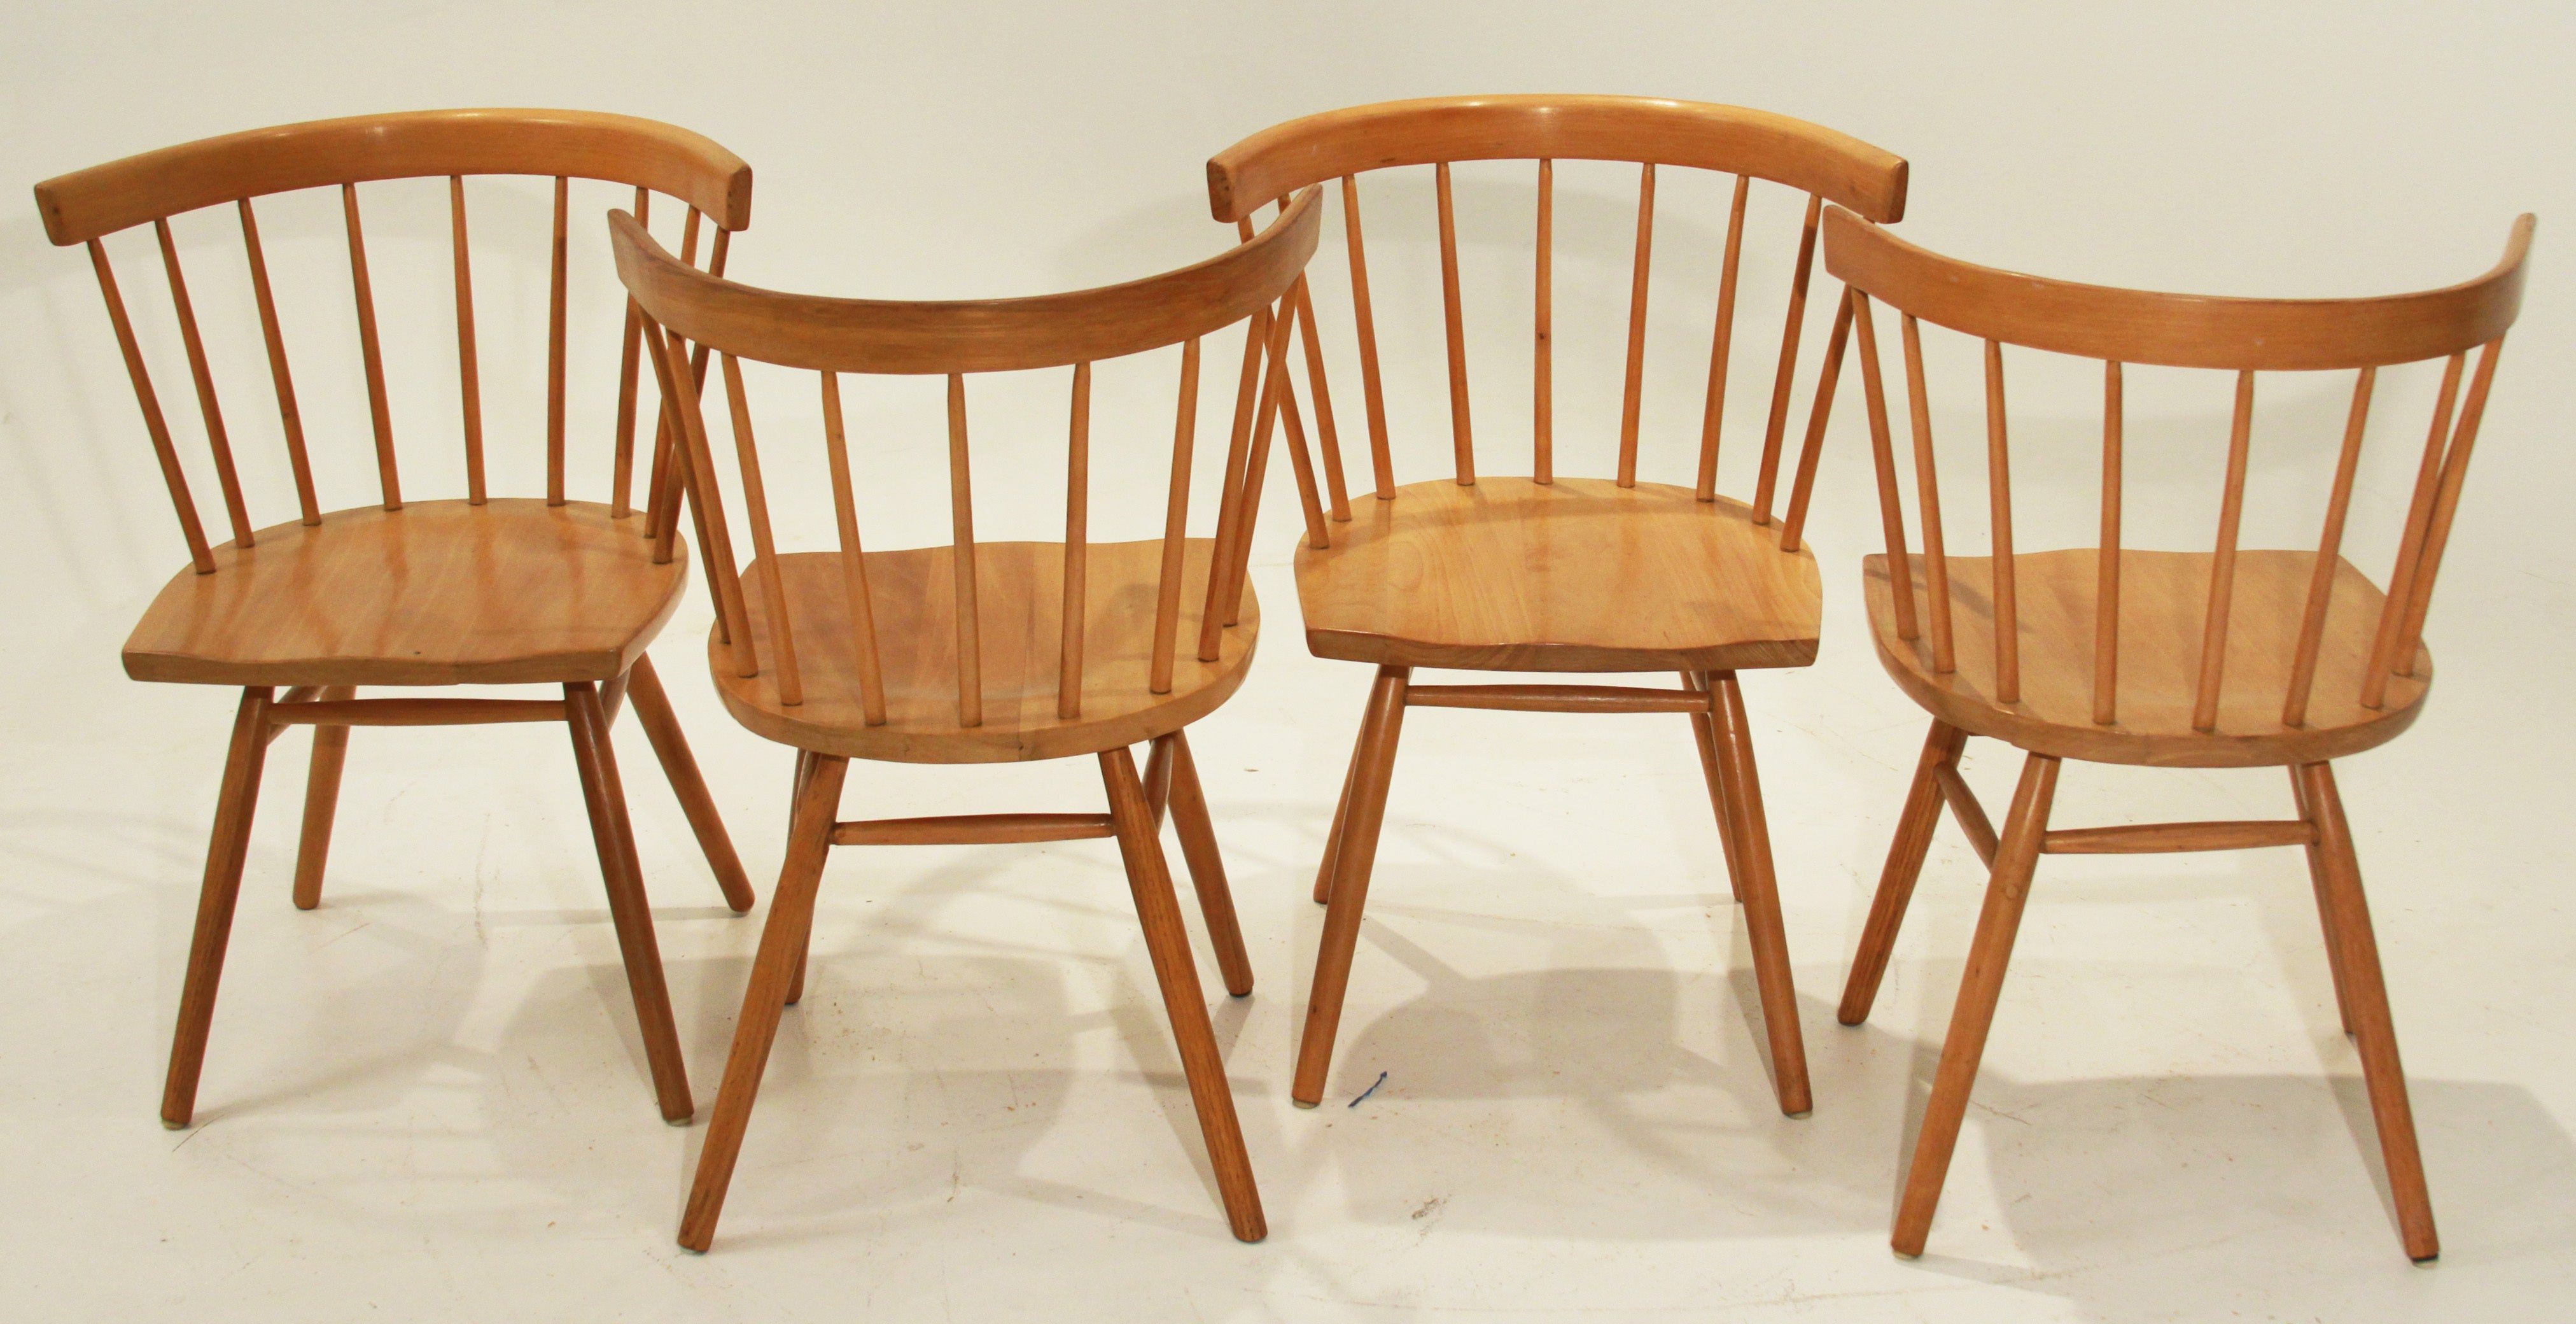 Set of Four Dining Chairs by George Nakashima for Knoll